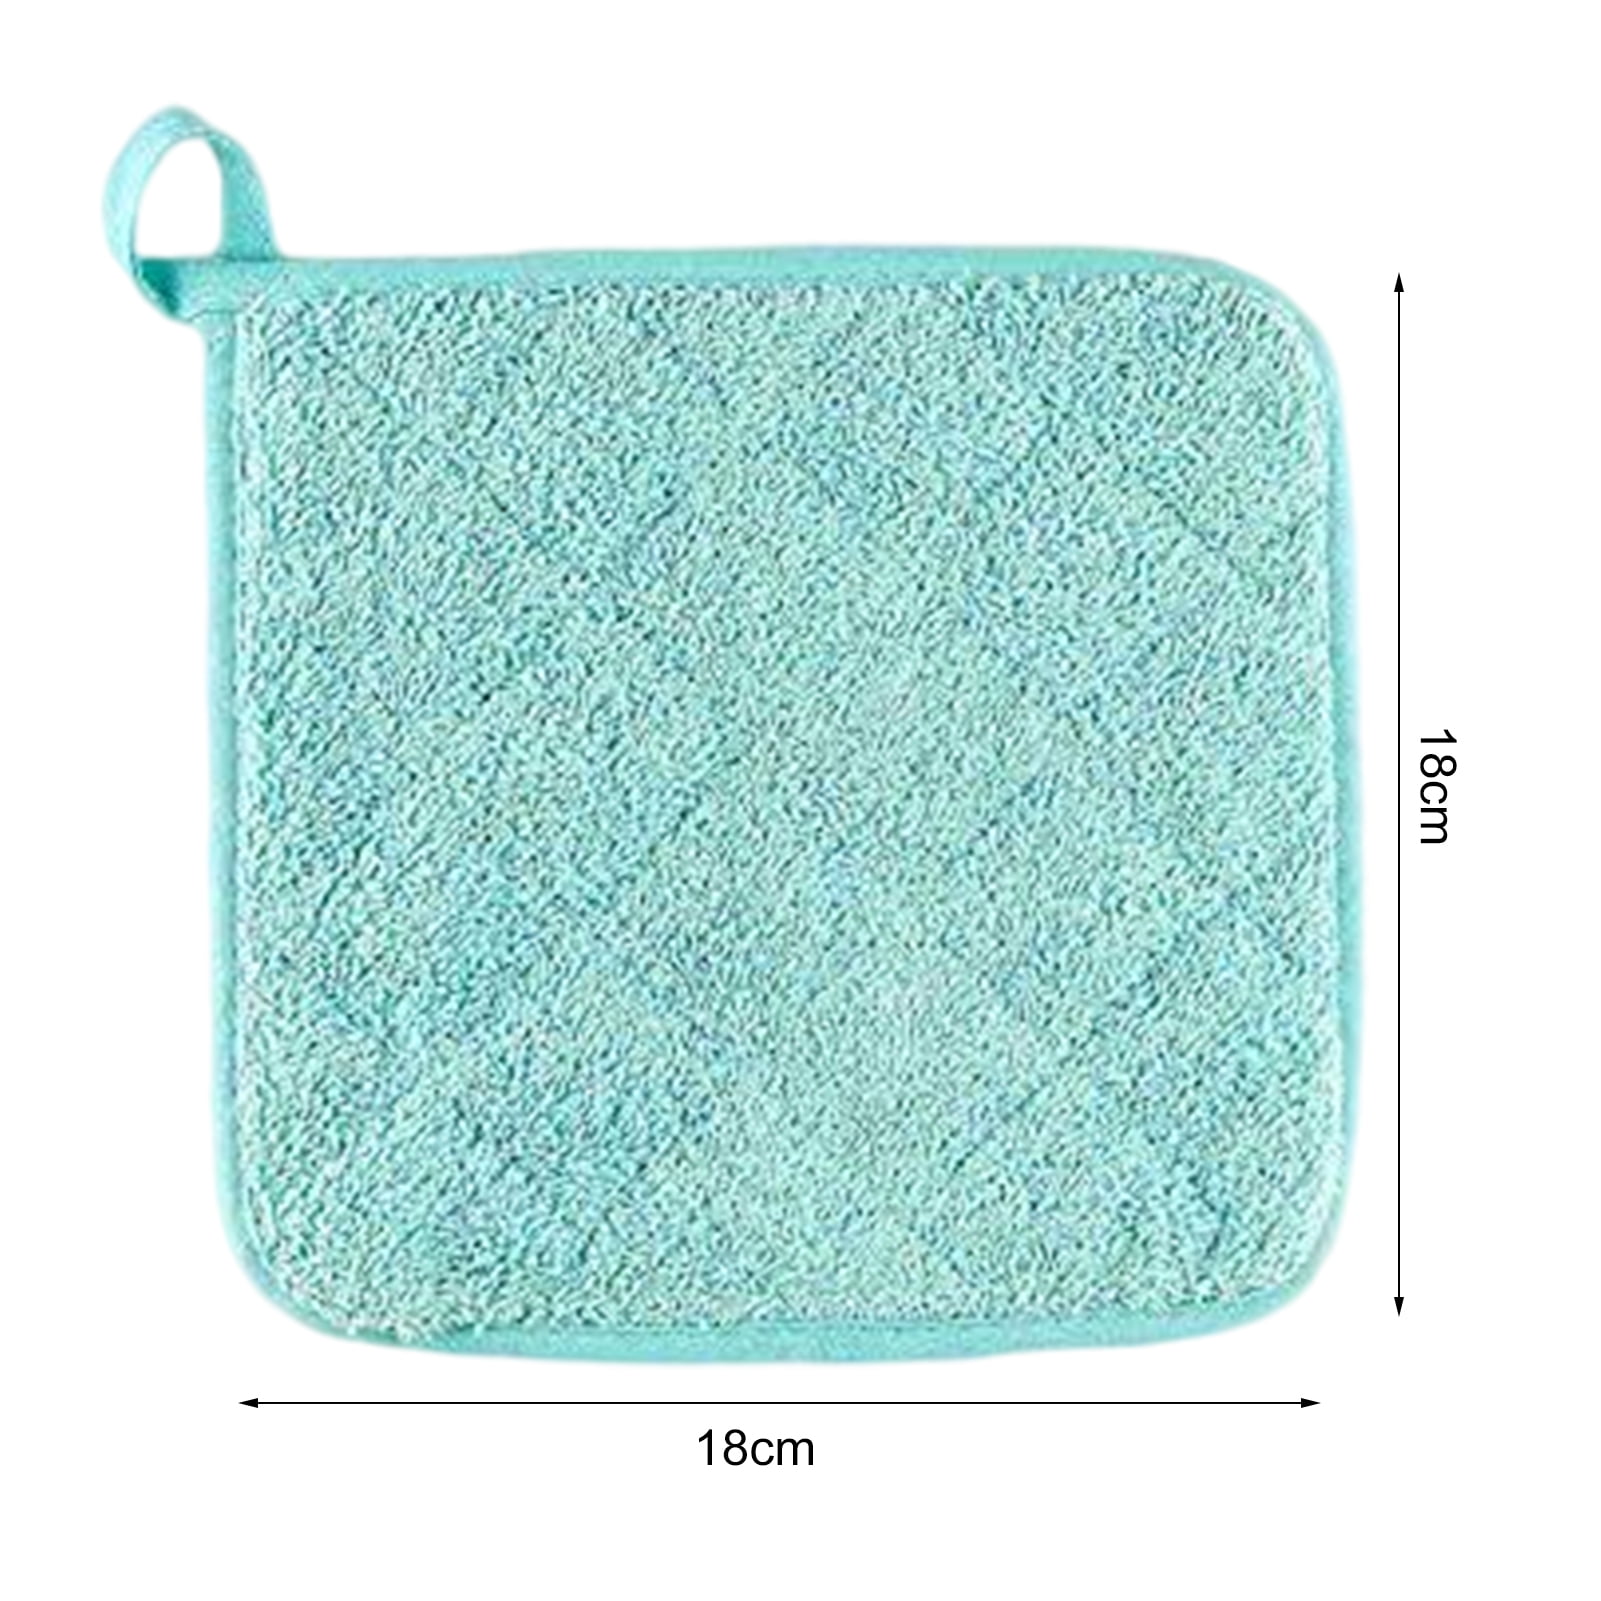 Zubebe 16 Pcs Oven Pot Holders with Pockets Bulk for Kitchen Polyester Heat  Resistant Potholders Oven Mitts Hot Pads Terry Cloth Coaster for